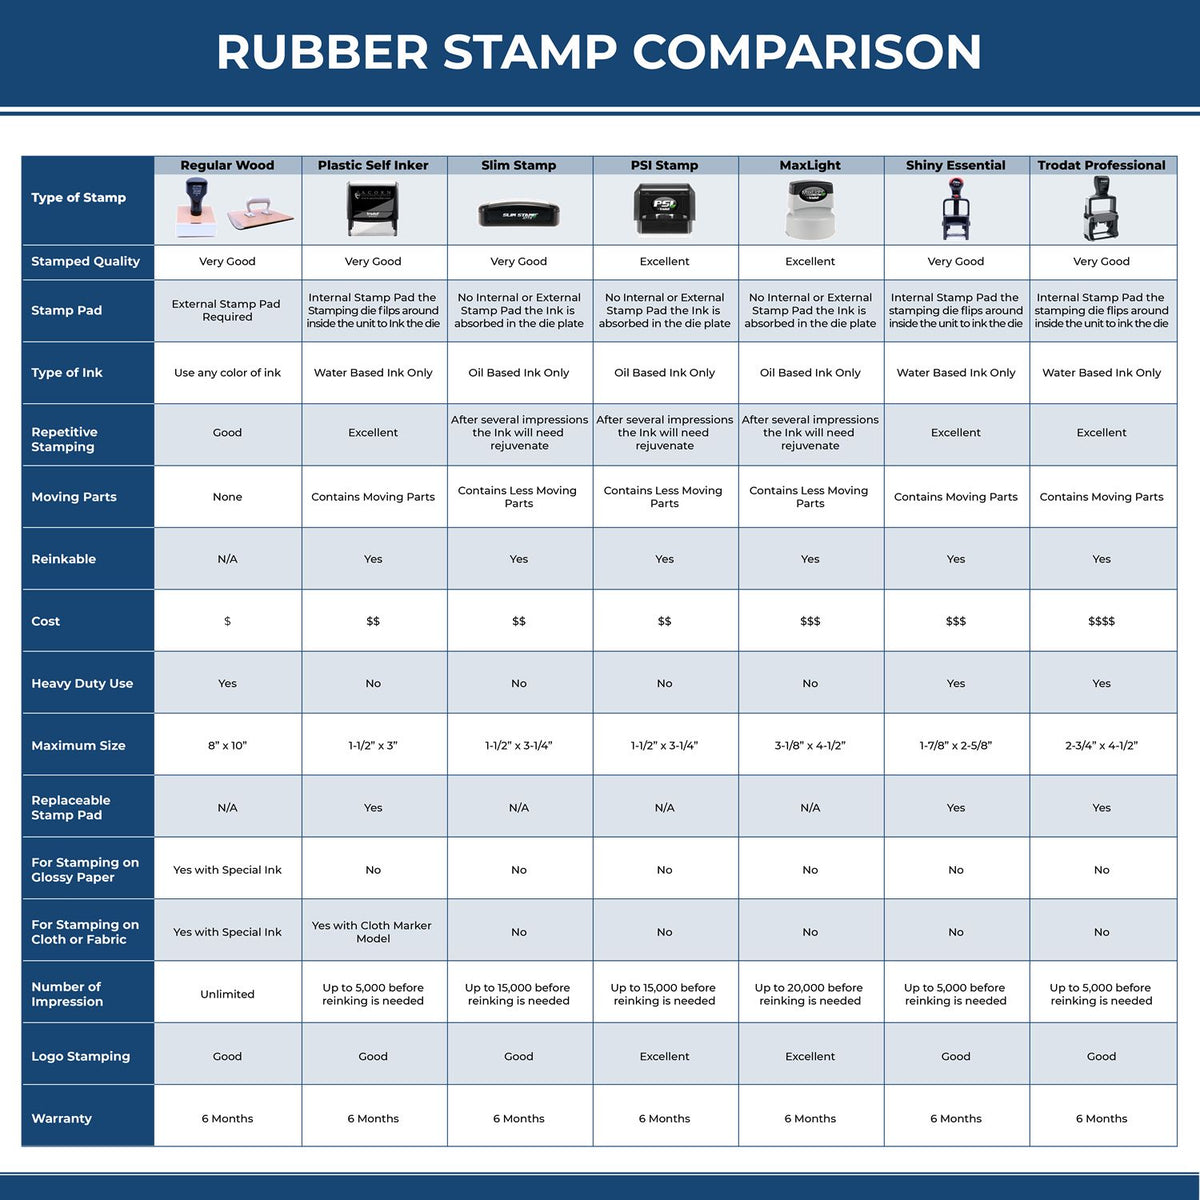 A comparison chart for the different types of mount models available for the Connecticut Landscape Architectural Seal Stamp.